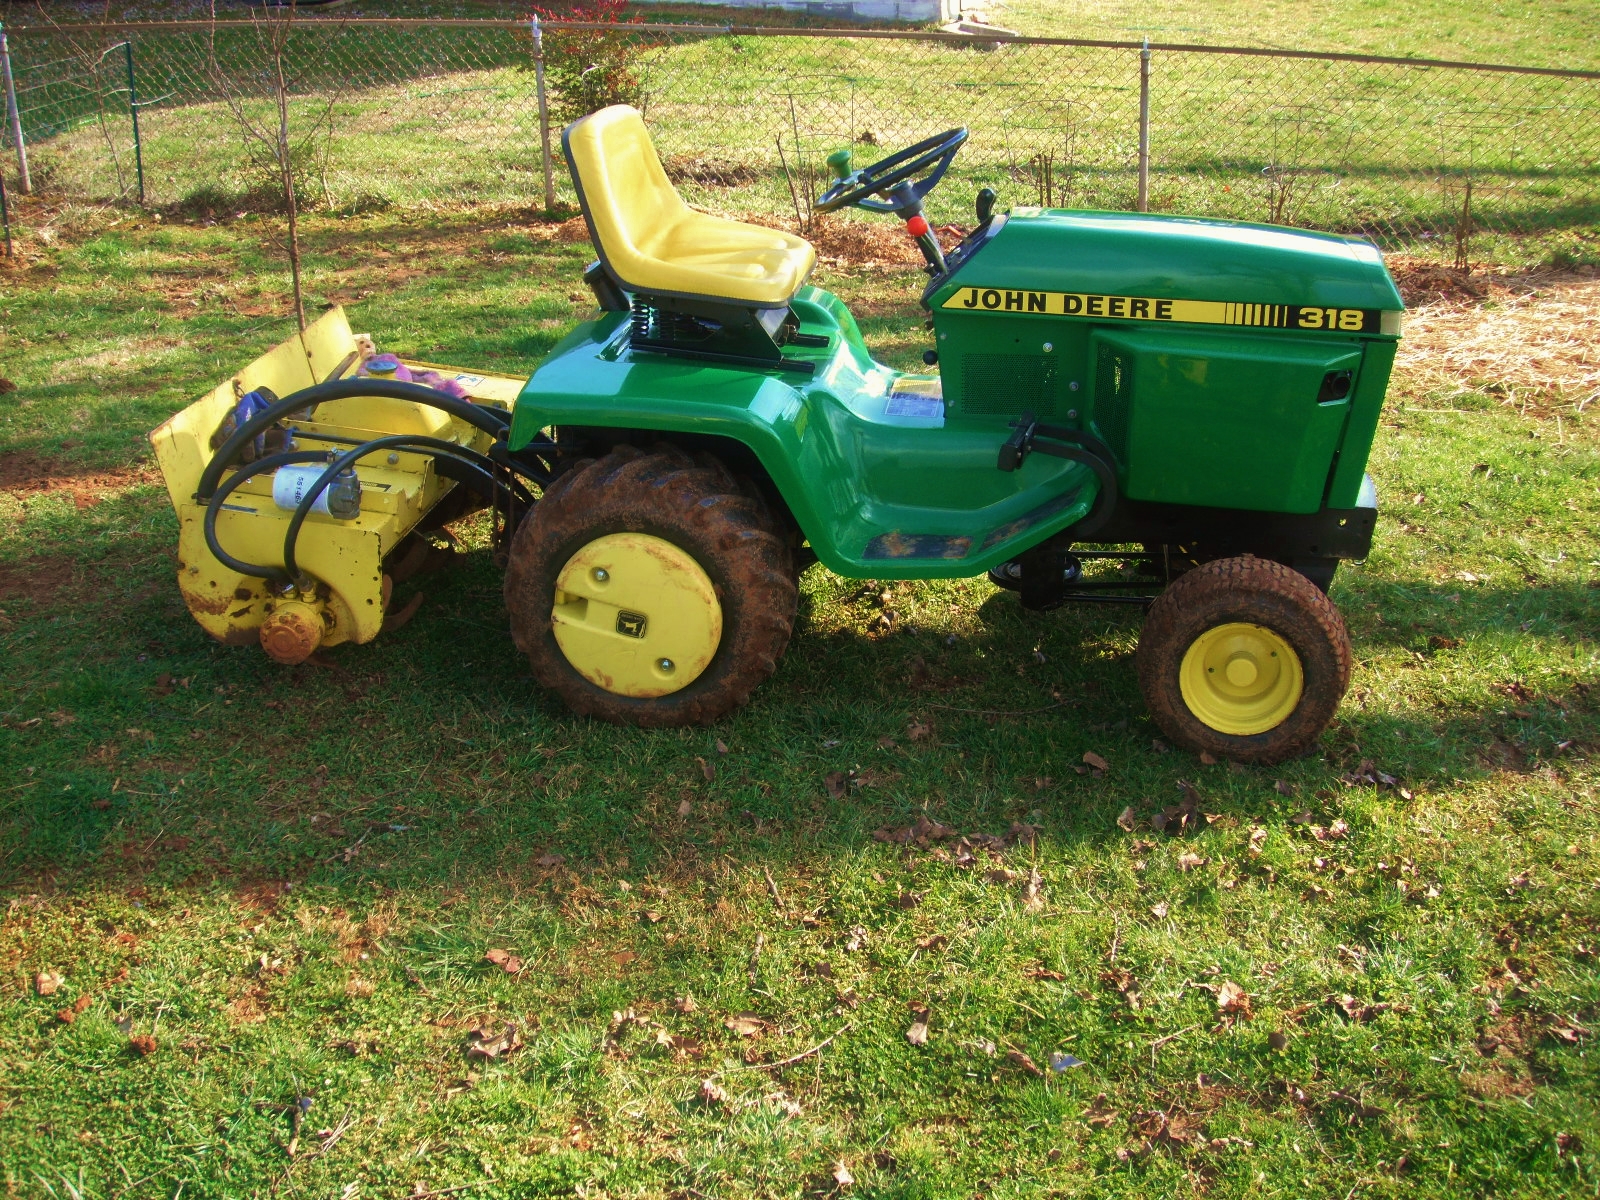 Rare/Cool JD attachment thread - MyTractorForum.com - The ...